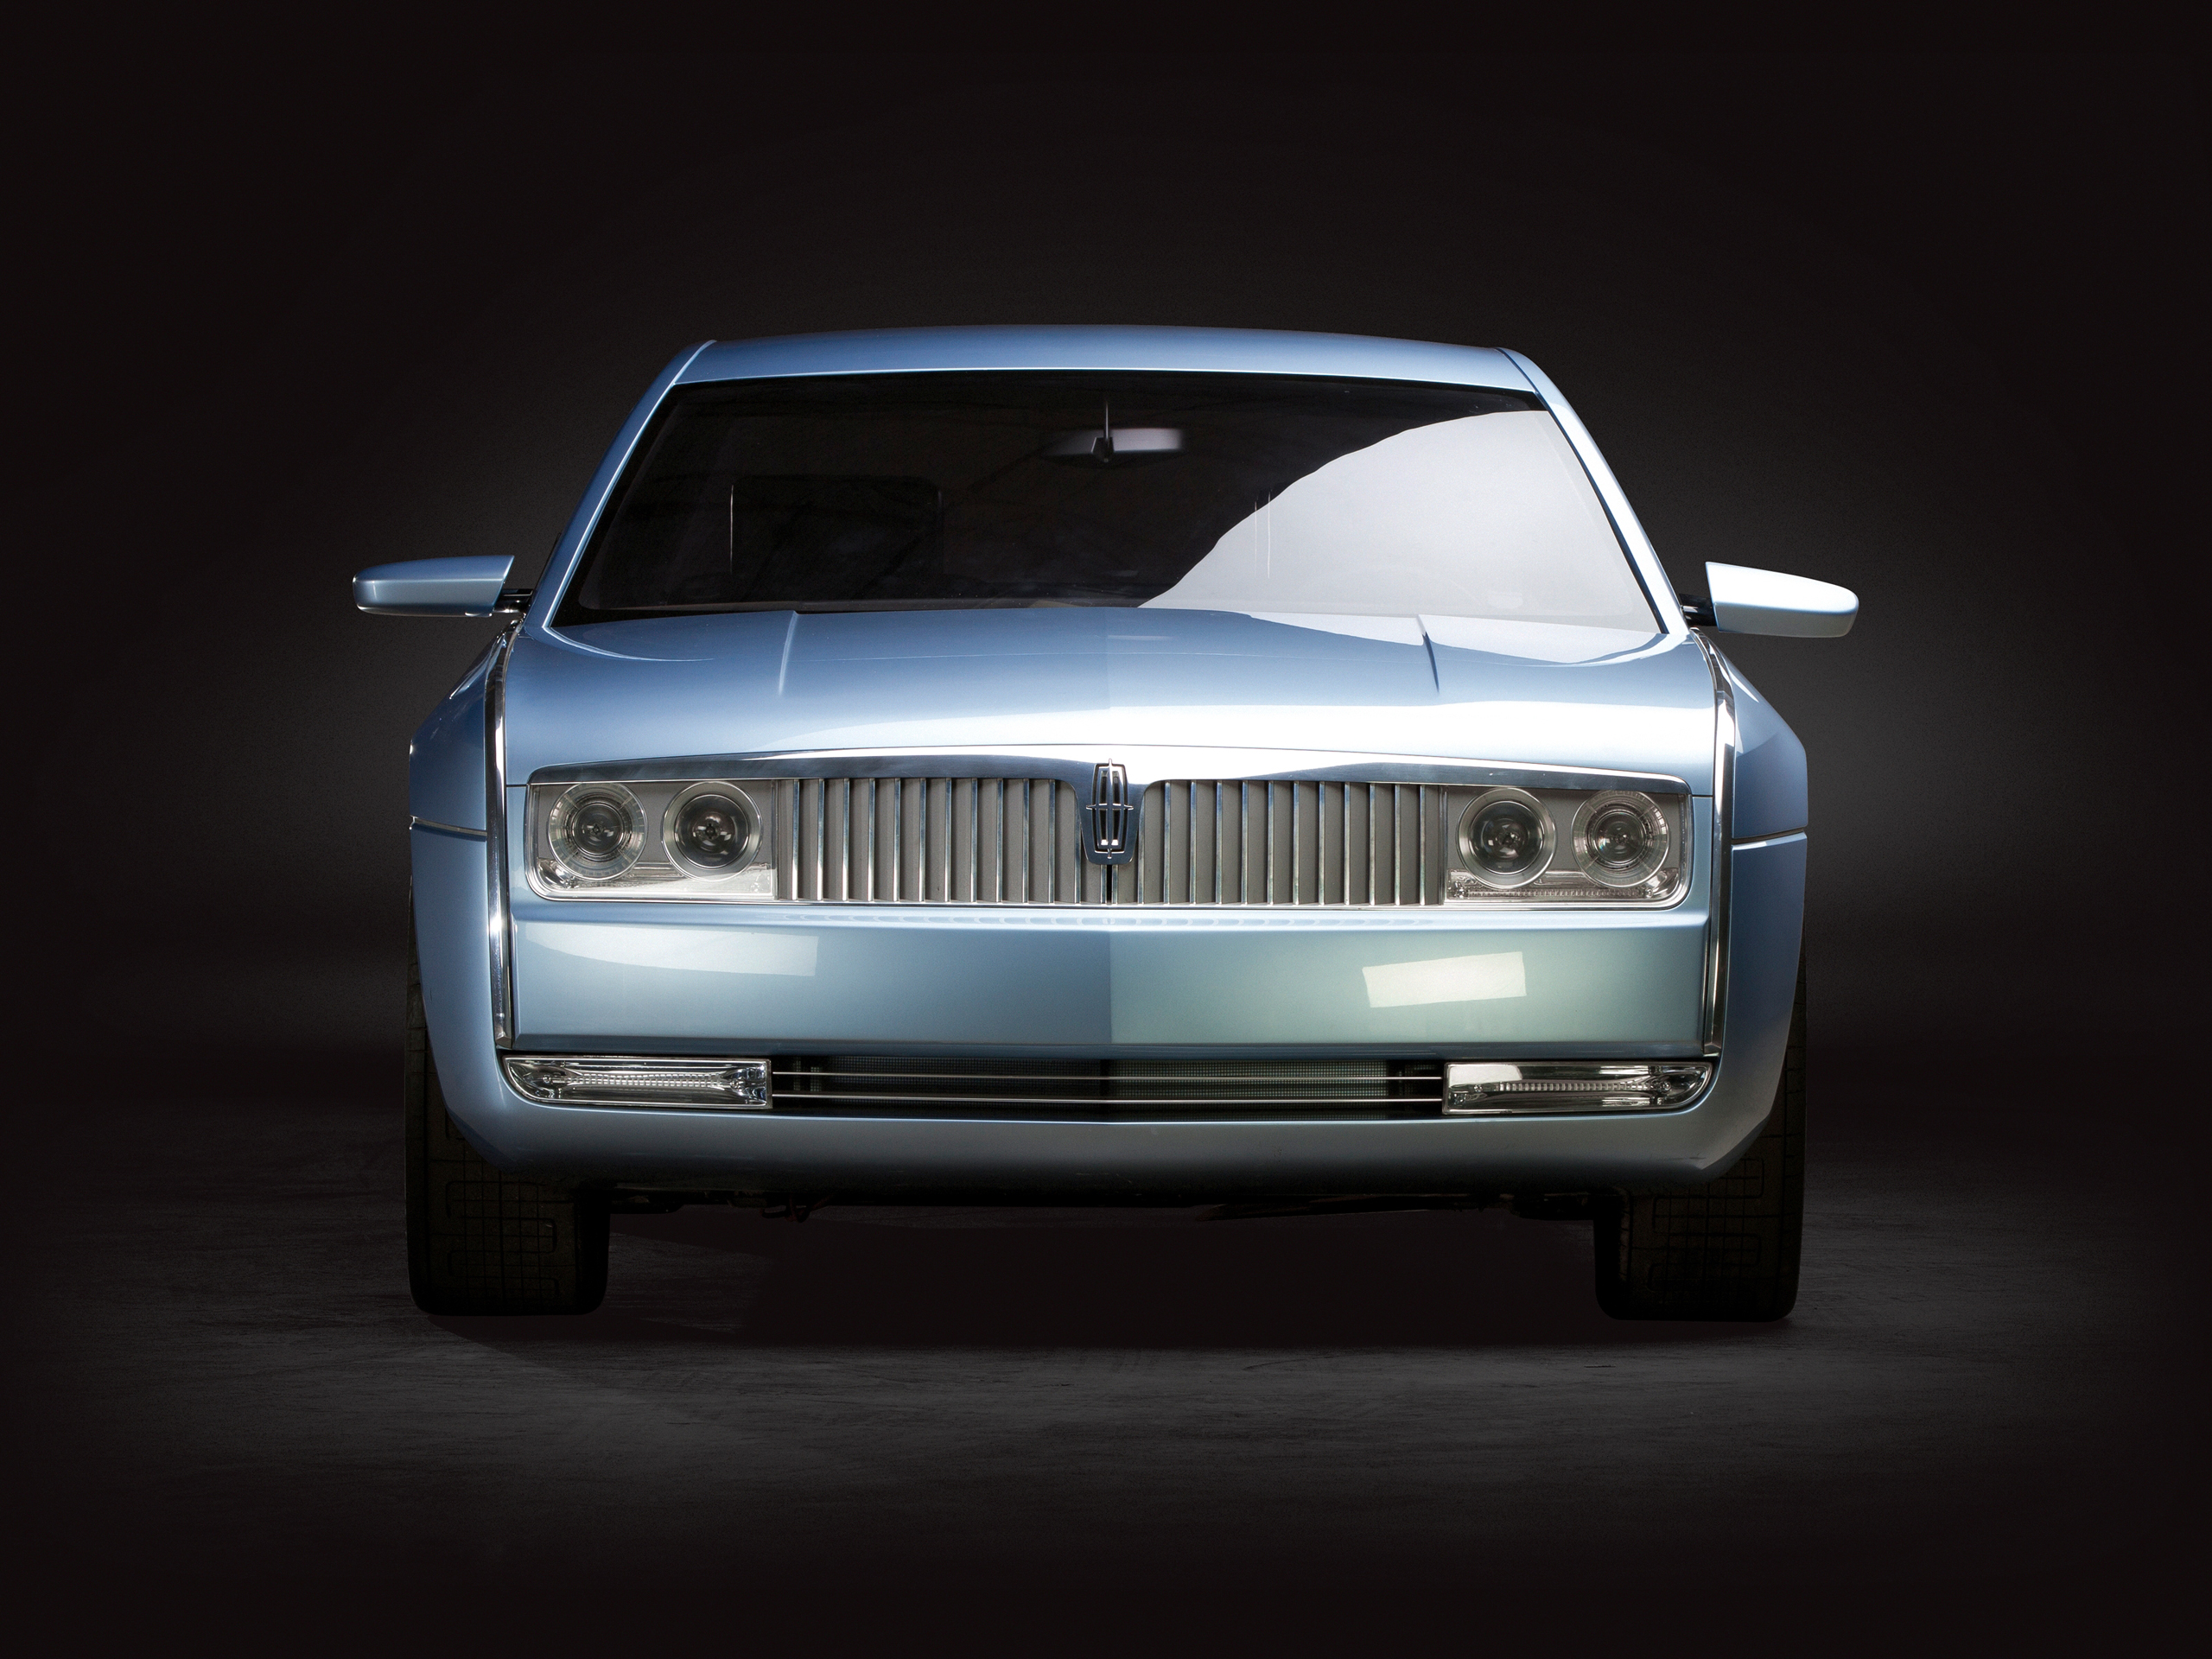 Lincoln Continental, 2002 - Photo: Teddy Pieper